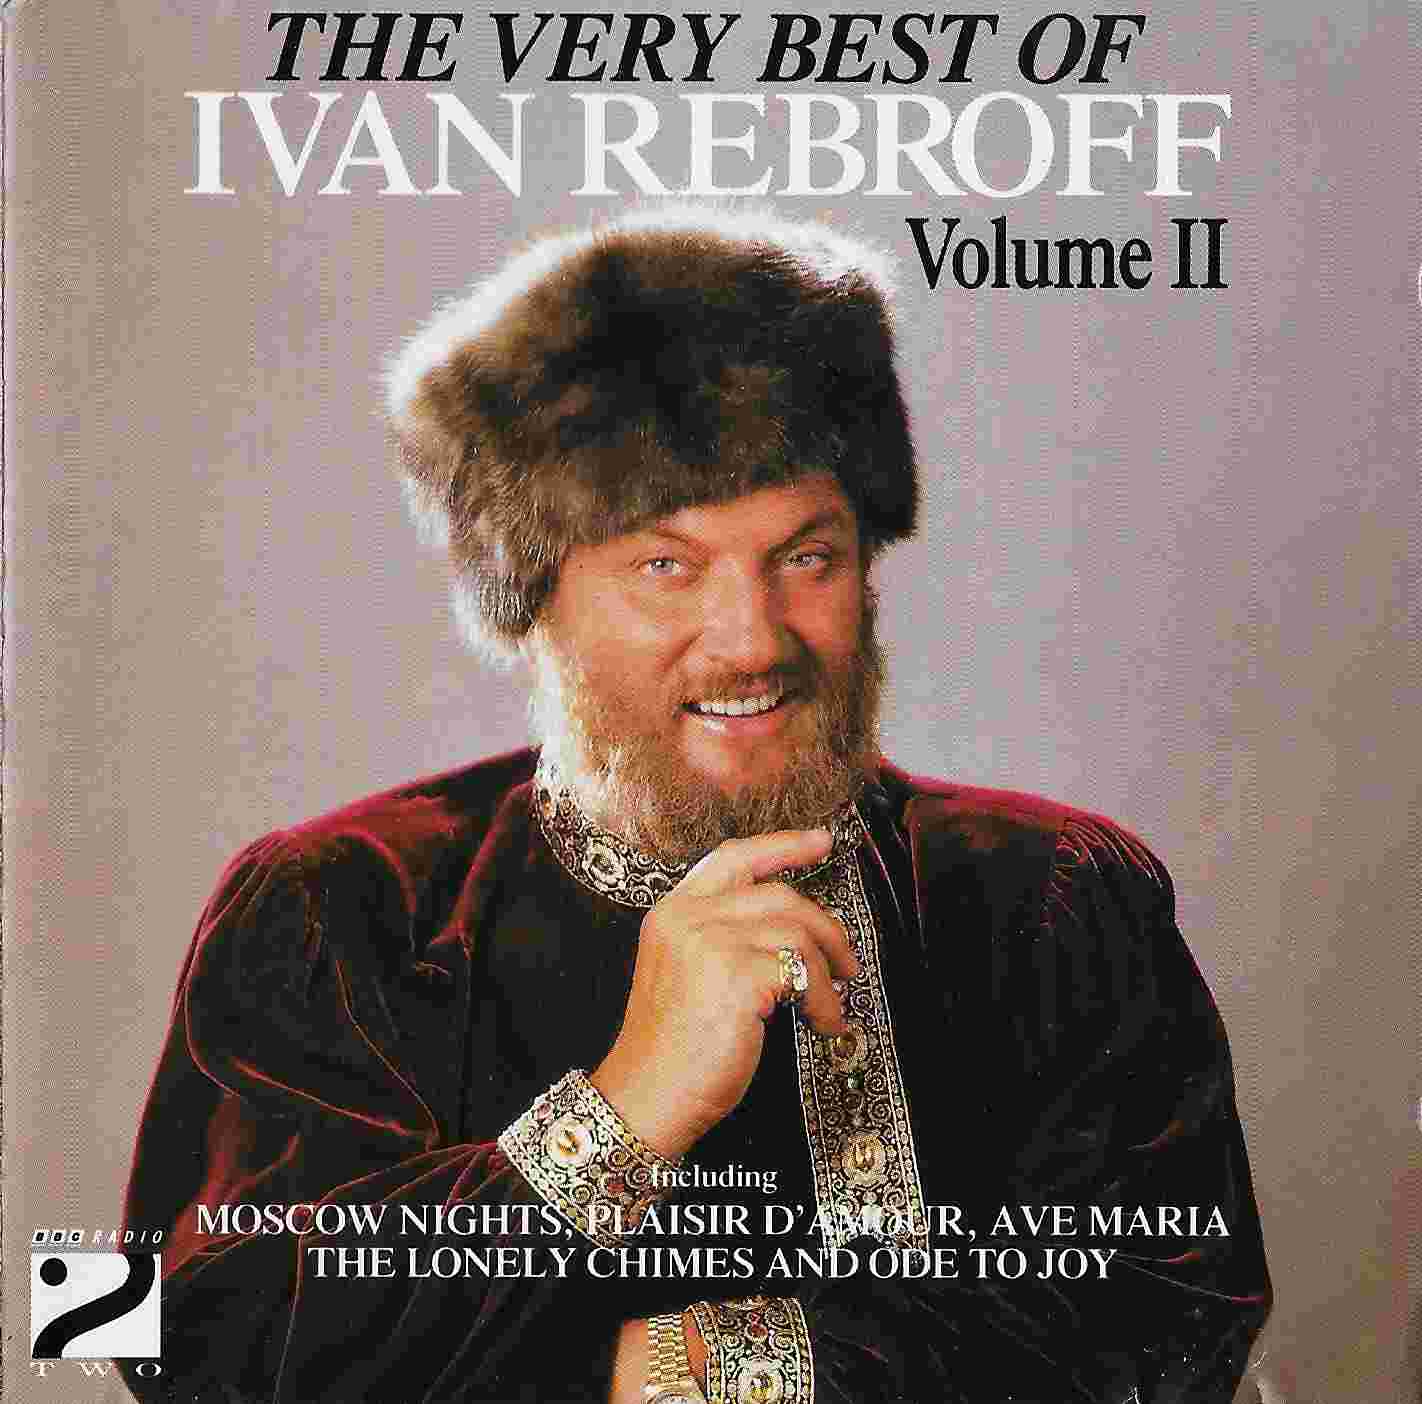 Picture of The very best of Ivan Rebroff - Volume 2 by artist Various from the BBC cds - Records and Tapes library